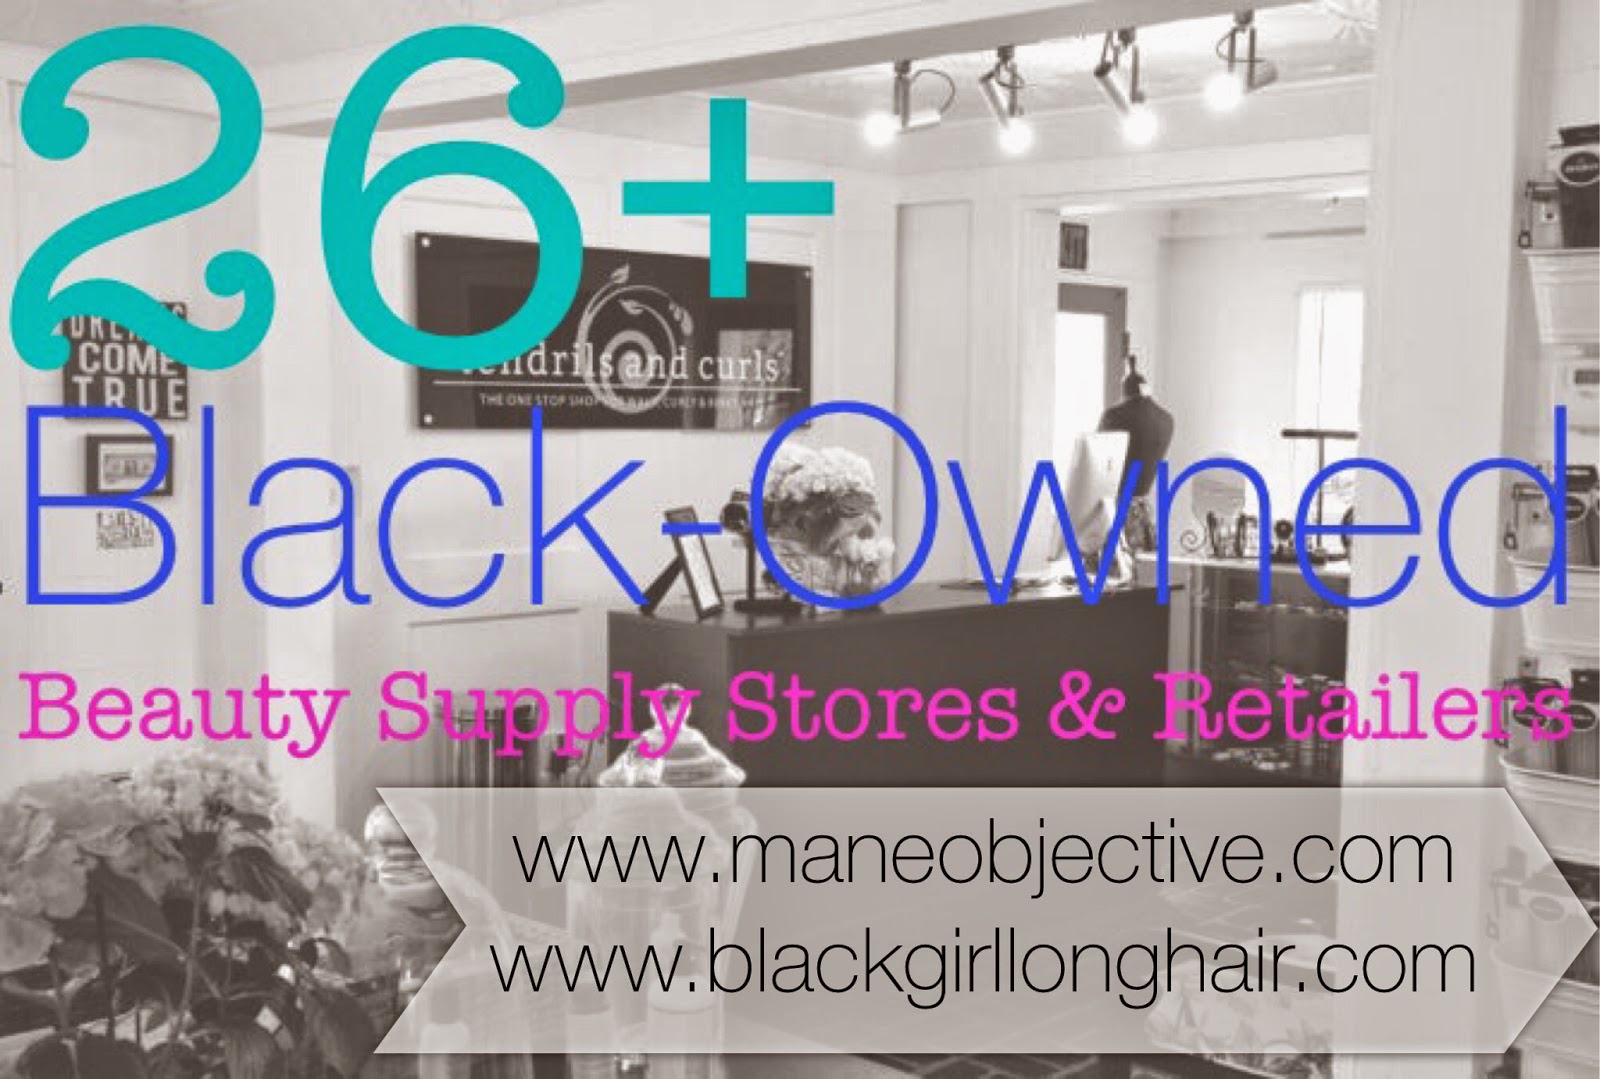 41 Best Photos Black Hair Beauty Supply Stores - Beauty Supplies & Makeup| 99 Cents Only Stores